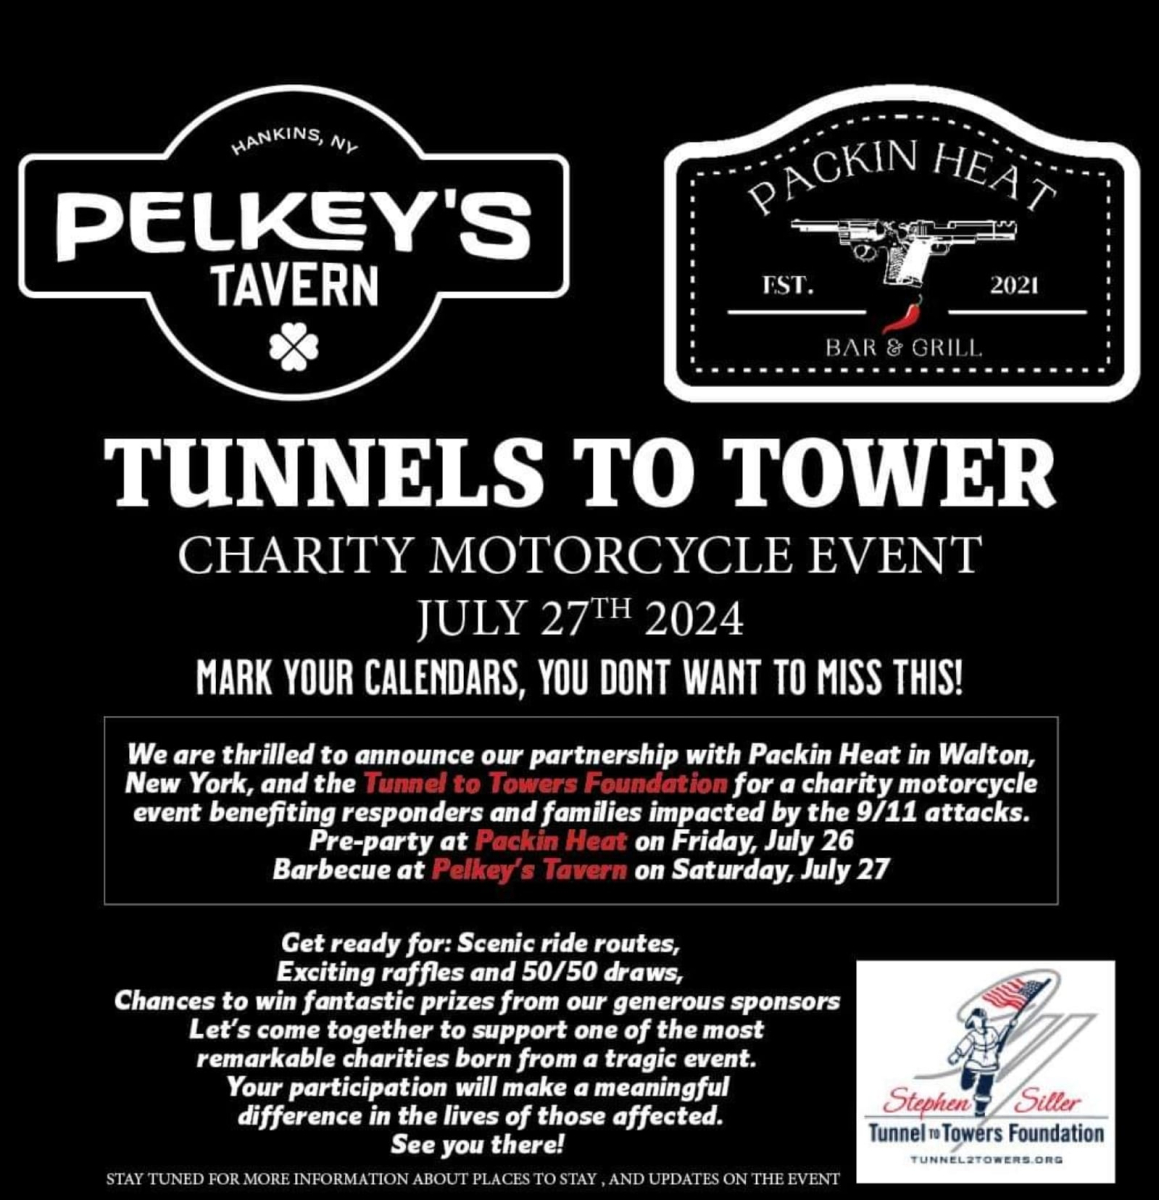 Tunnels to Tower Charity Motorcycle Event